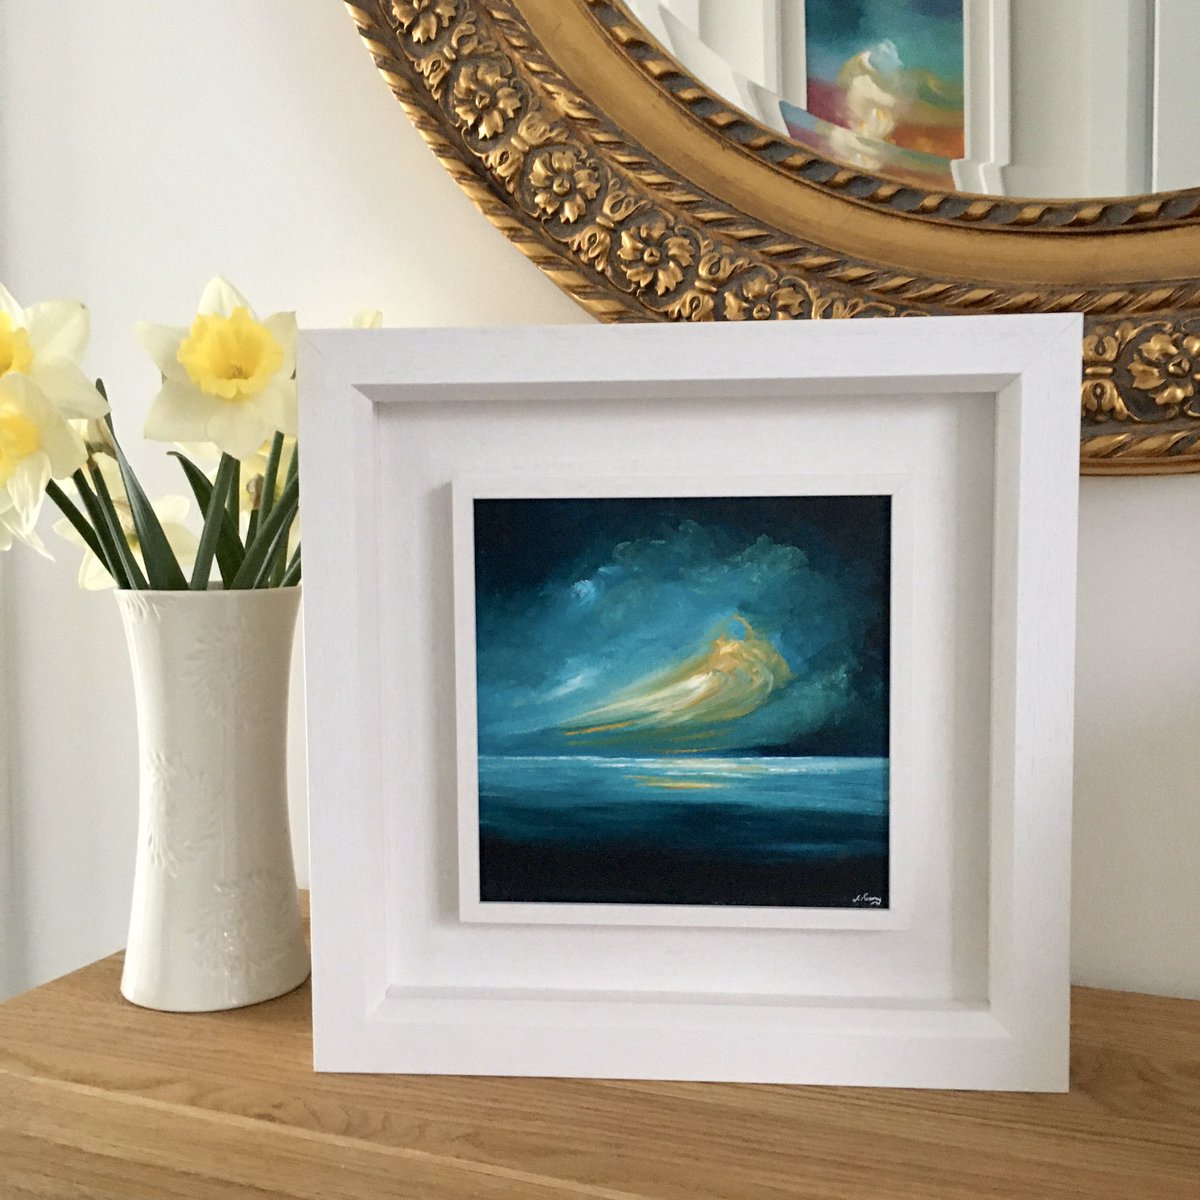 Good morning, I thought I’d share my recent painting inspired by #stormciara complete in her frame! @barrabest #UKGiftHour #UKWeekendHour #womaninbizhour #UKGiftAm